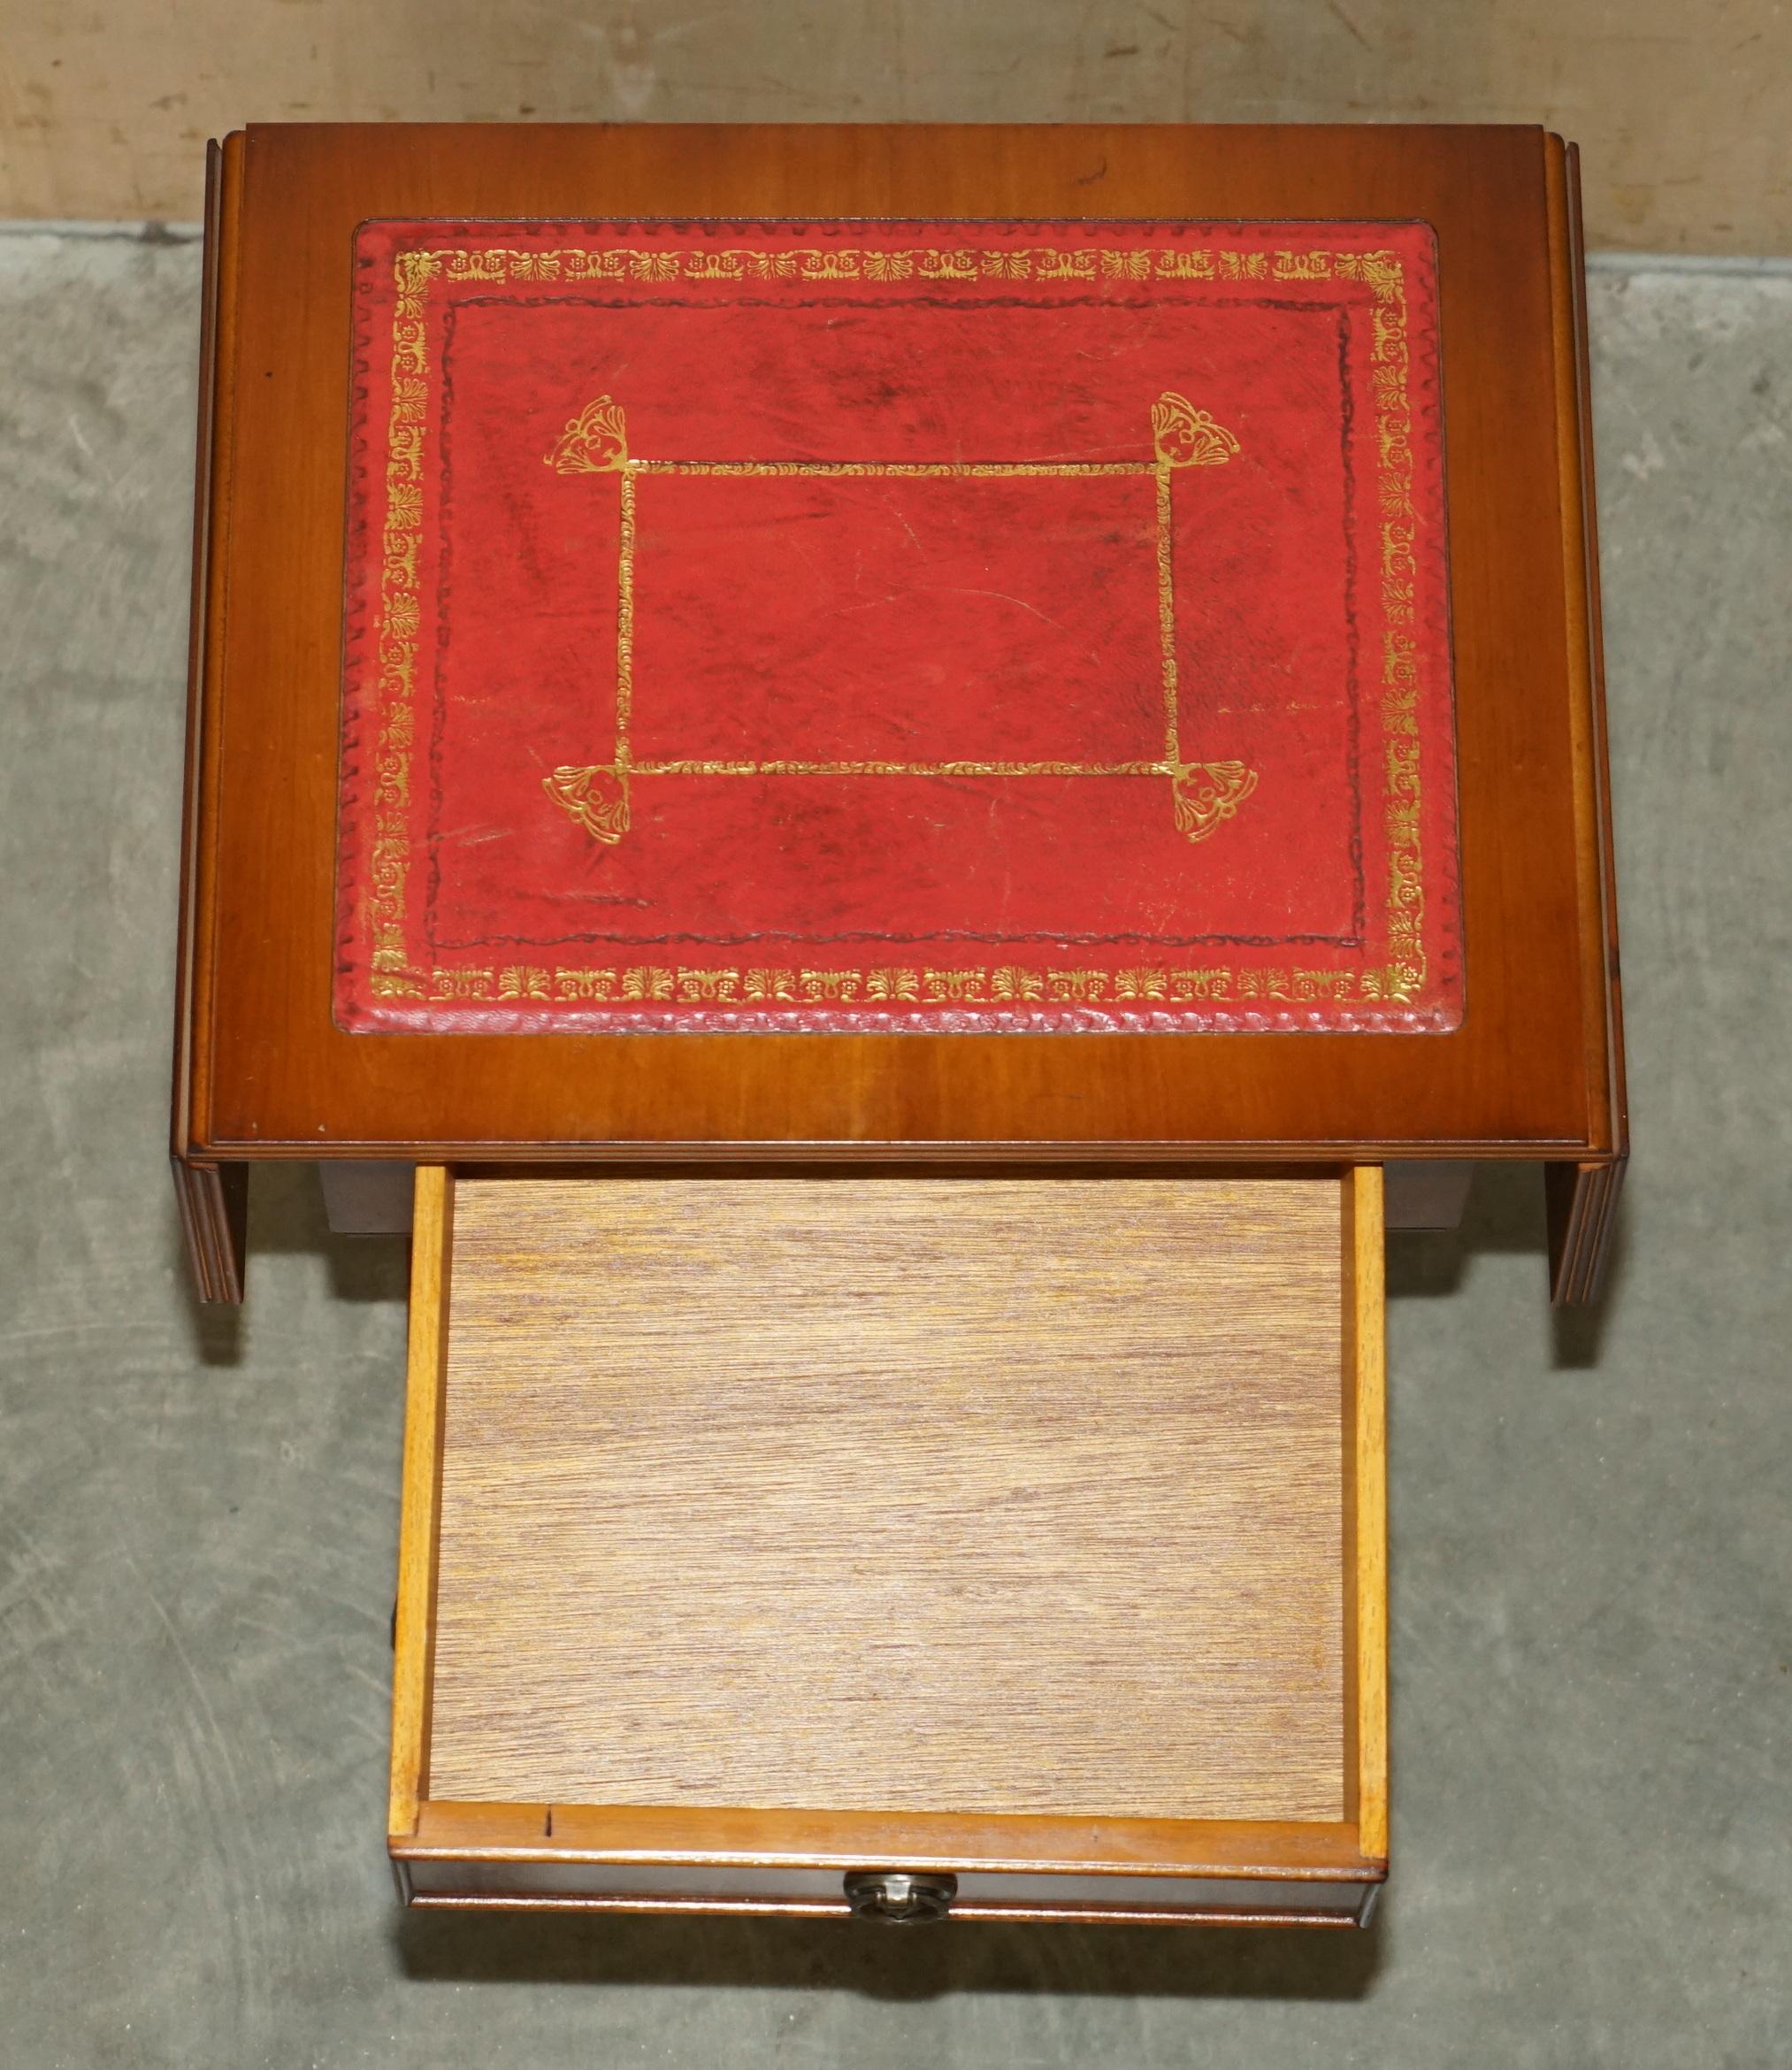 LOVELY ViNTAGE OXBLOOD LEATHER EXTENDING SIDE TABLE WITH GOLD LEAF INLAY For Sale 10